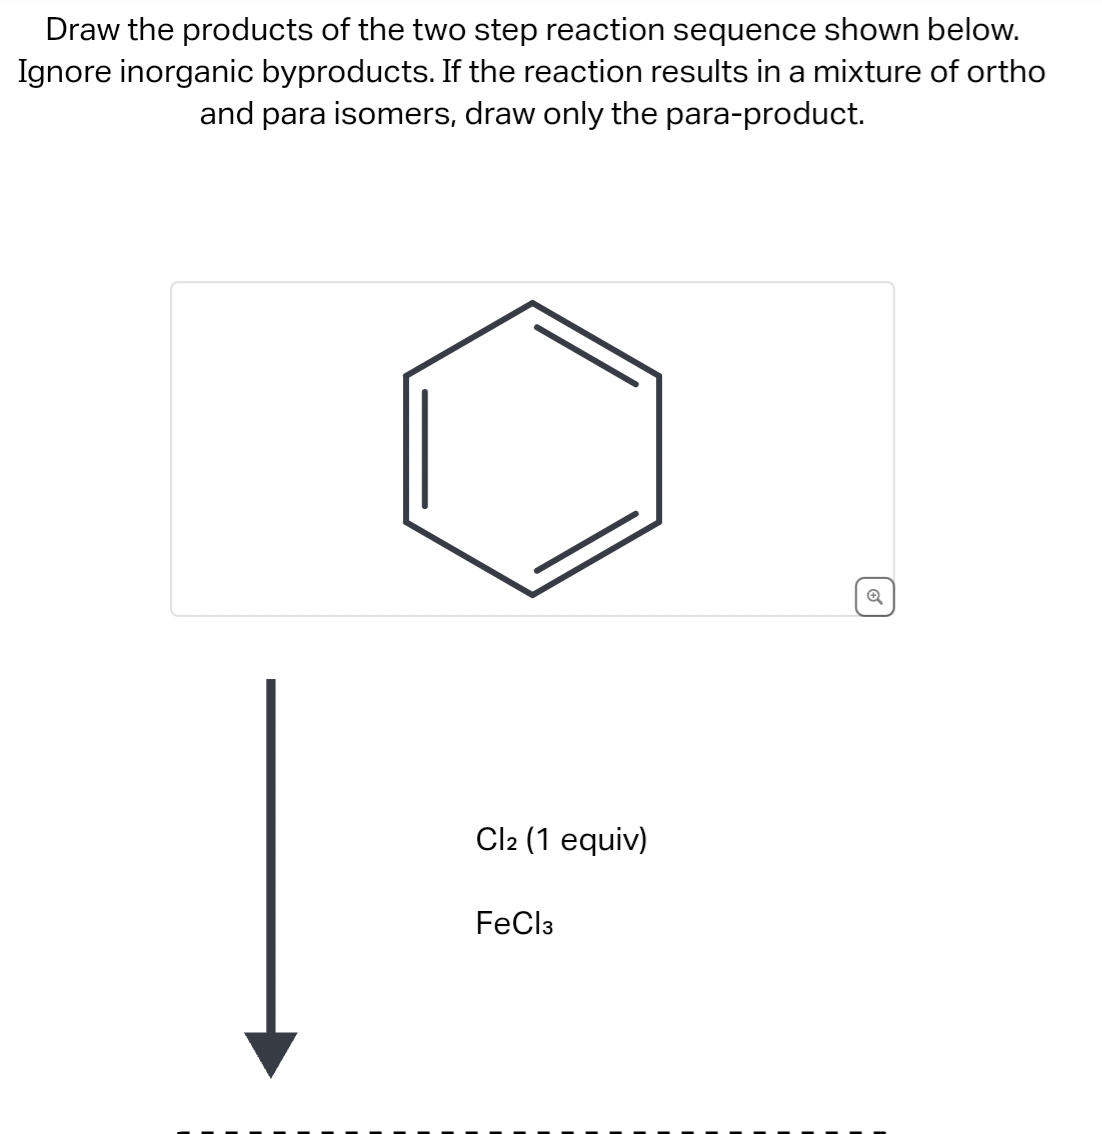 Draw the products of the two step reaction sequence shown below.
Ignore inorganic byproducts. If the reaction results in a mixture of ortho
and para isomers, draw only the para-product.
Cl2 (1 equiv)
FeCl3
6